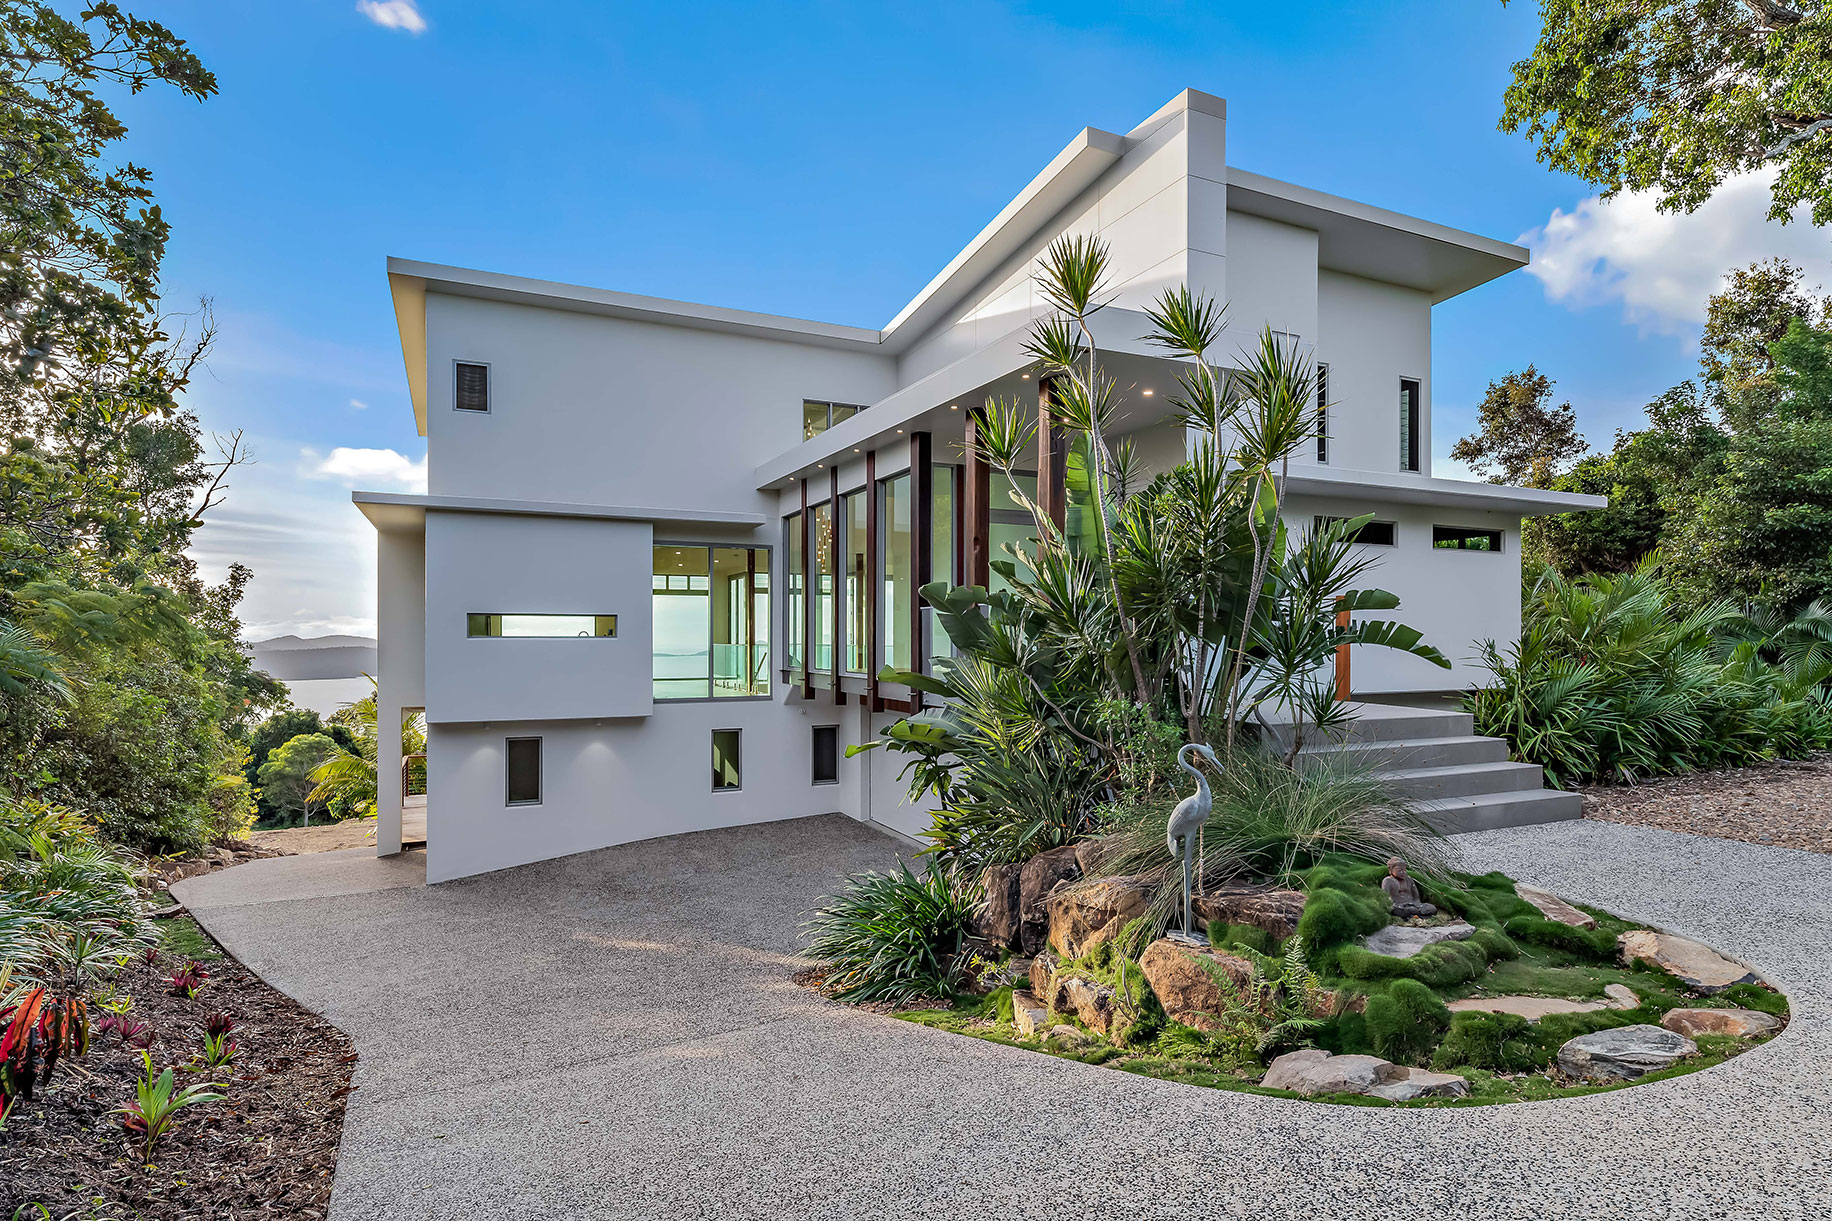 The highly skilled owner-builder/vendor has spared no expense in crafting one of the Whitsunday's most superb homes.